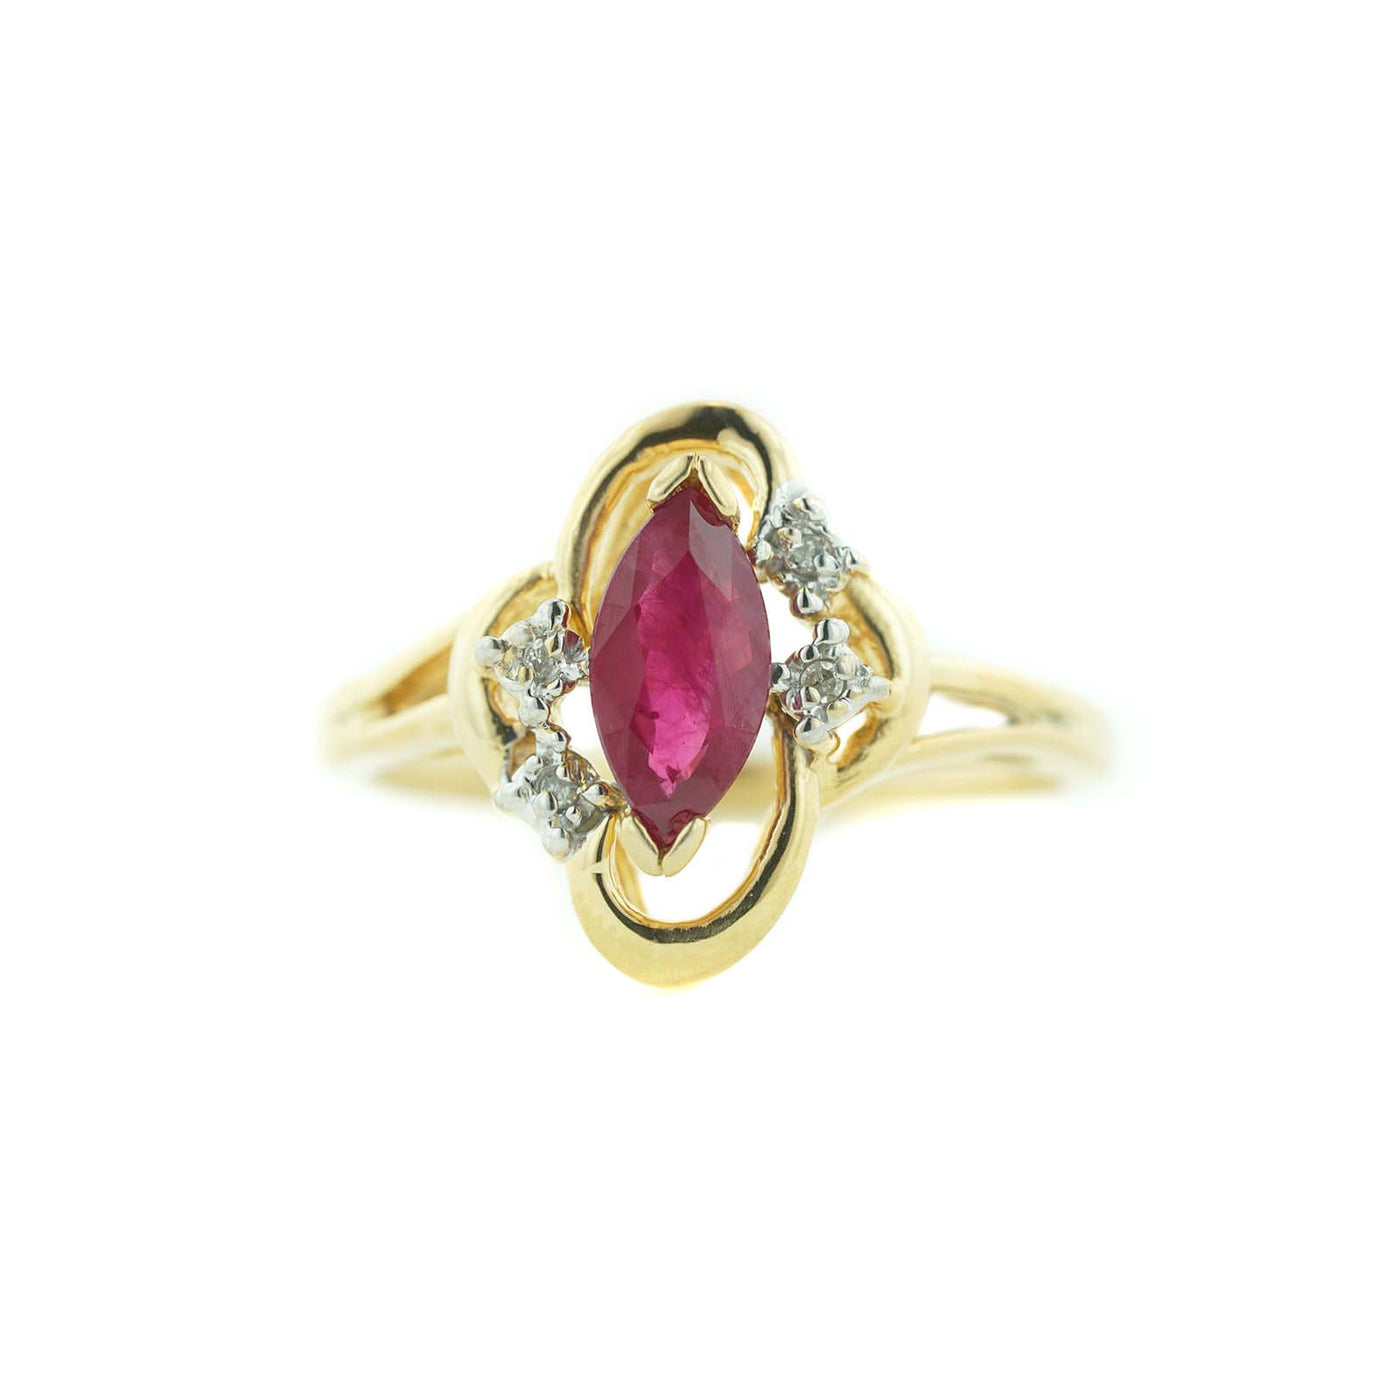 ruby ring, ruby rings, genuine ruby rings, ruby engagement rings, ruby necklace, rubies and diamonds, mens ruby rings, ruby set, ruby wedding ring, diamond and ruby ring, ruby ring gold, vintage ruby rings, red ruby ring, gold ruby ring, real ruby rings,